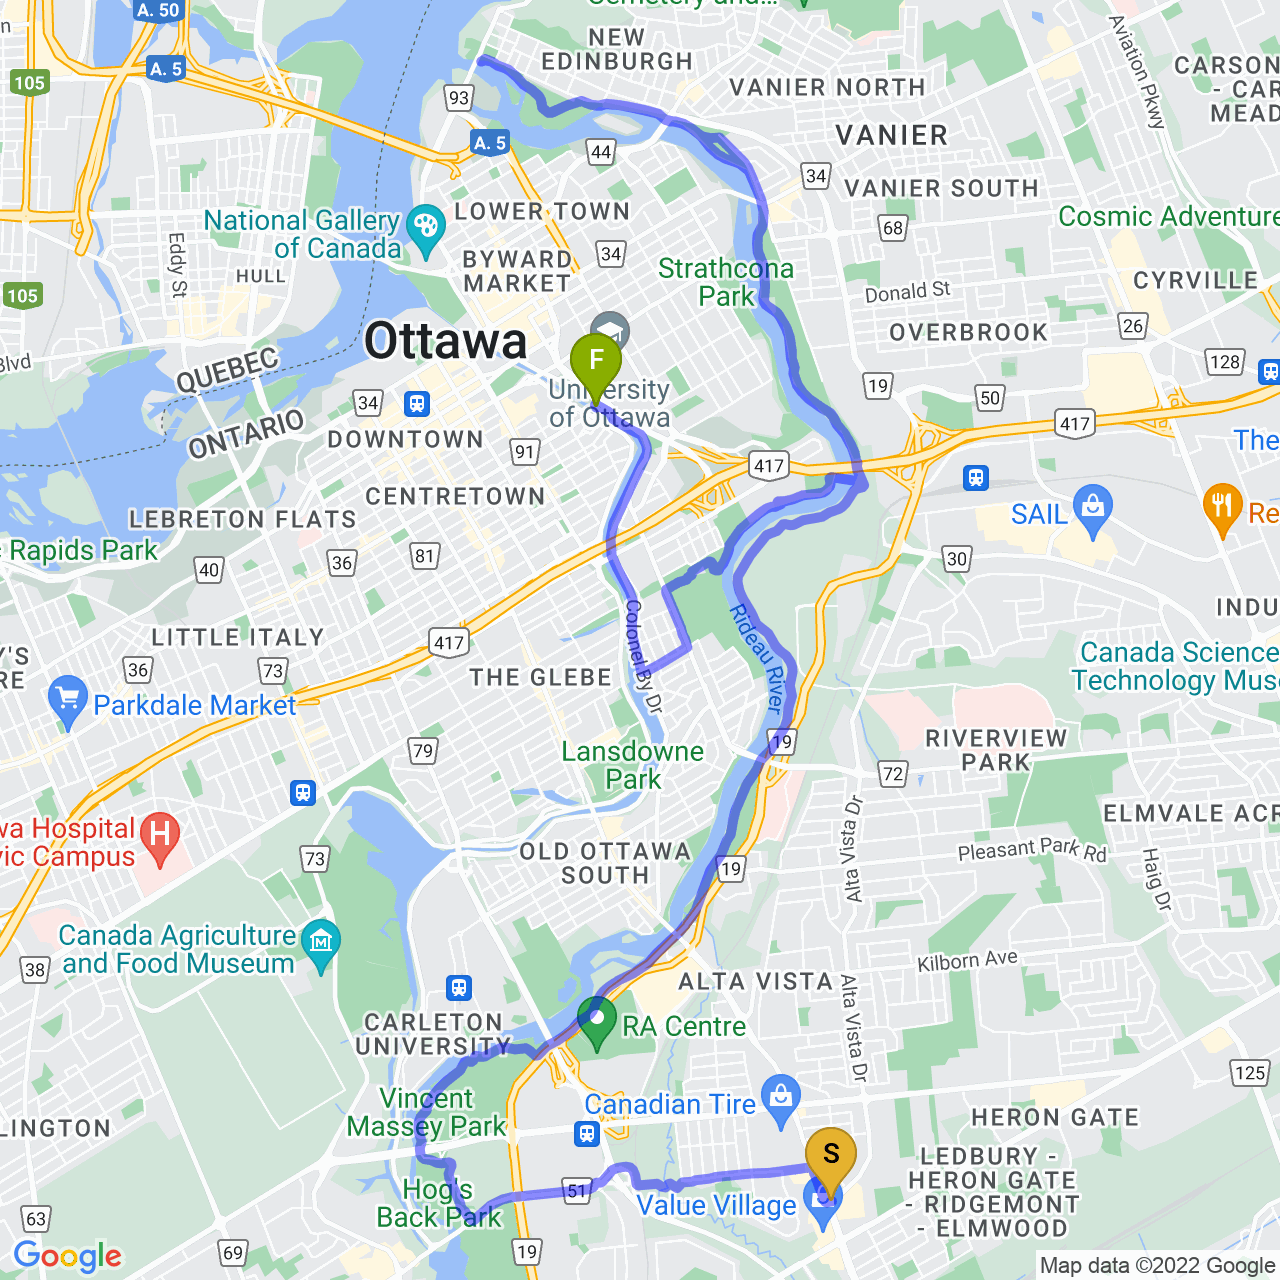 map of fall ride